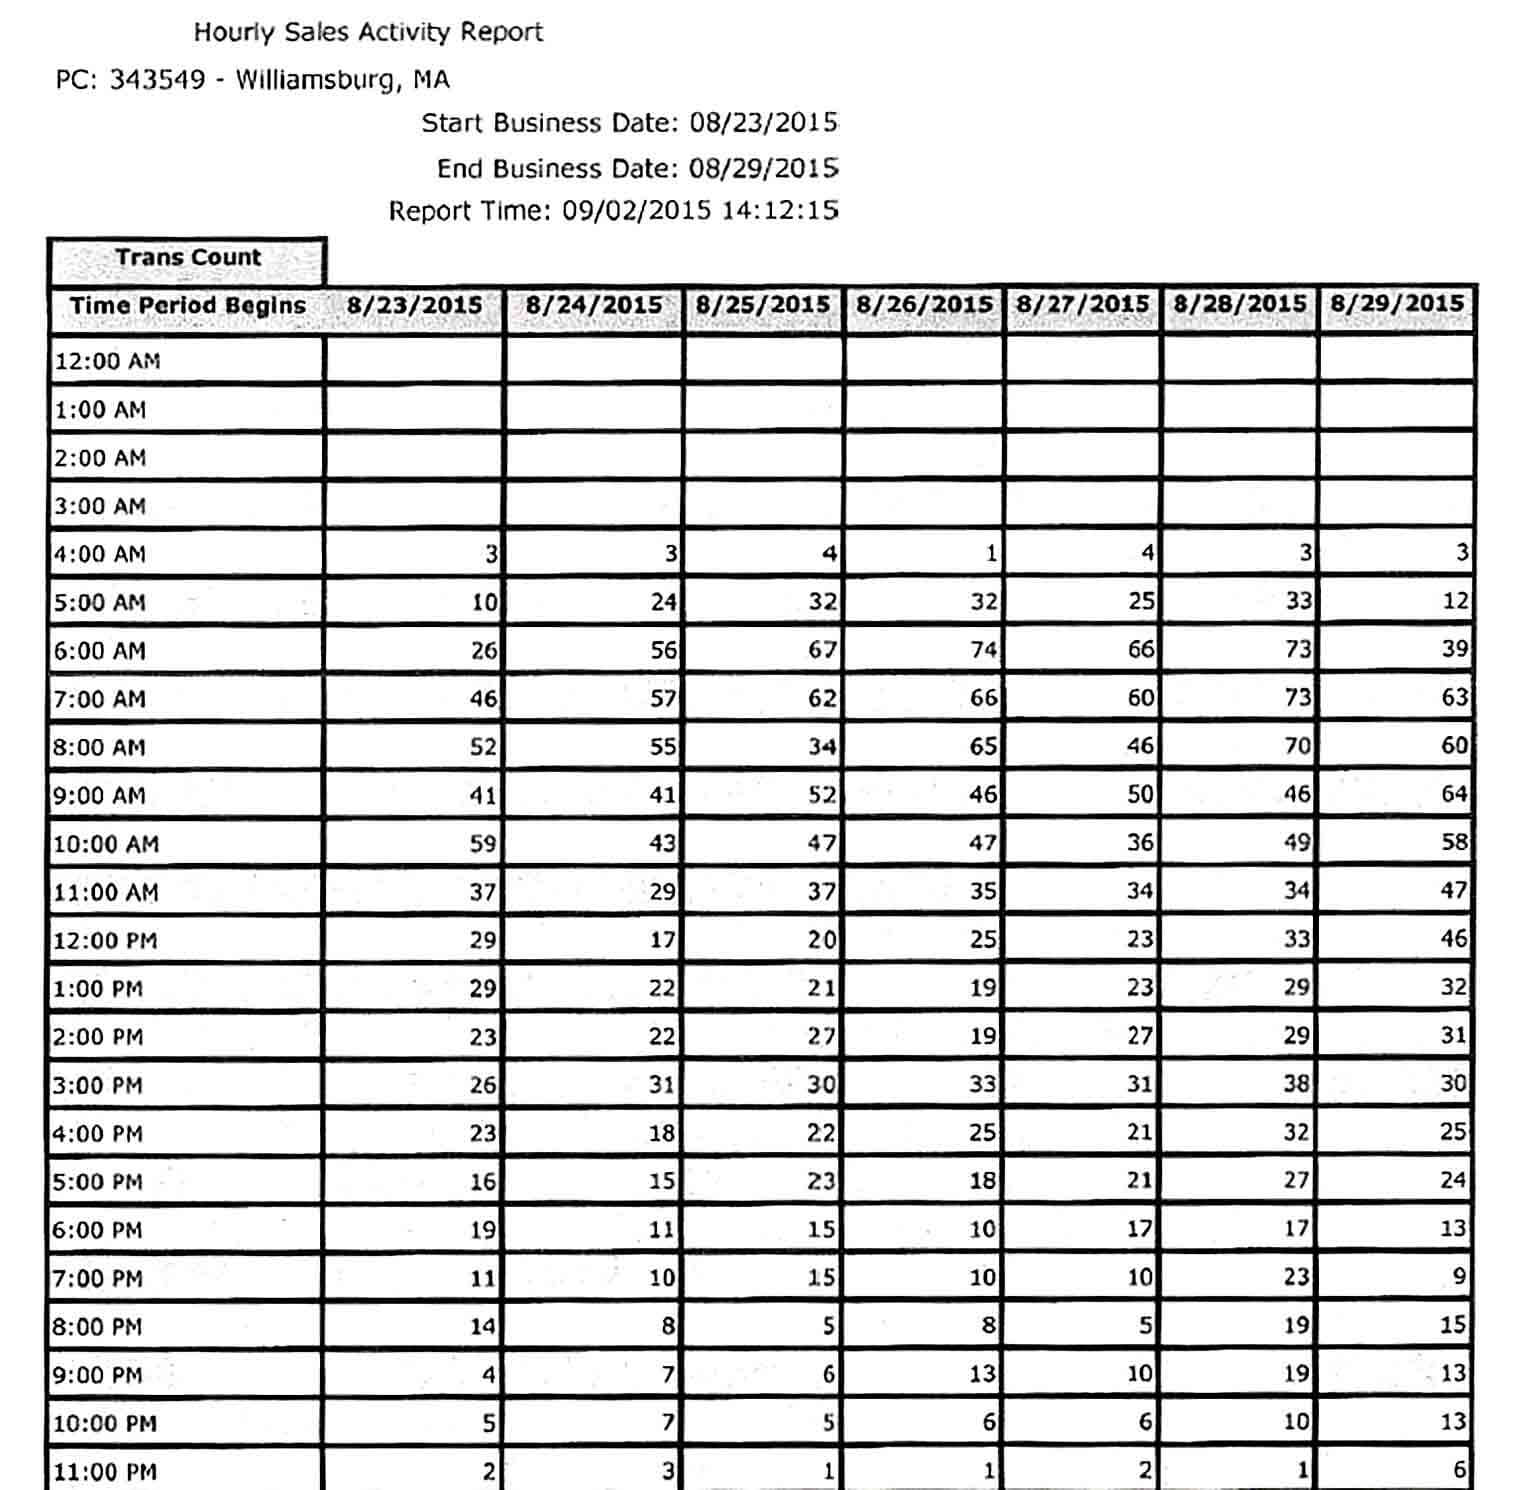 Sample Hourly Sales Activity Report PDF Template